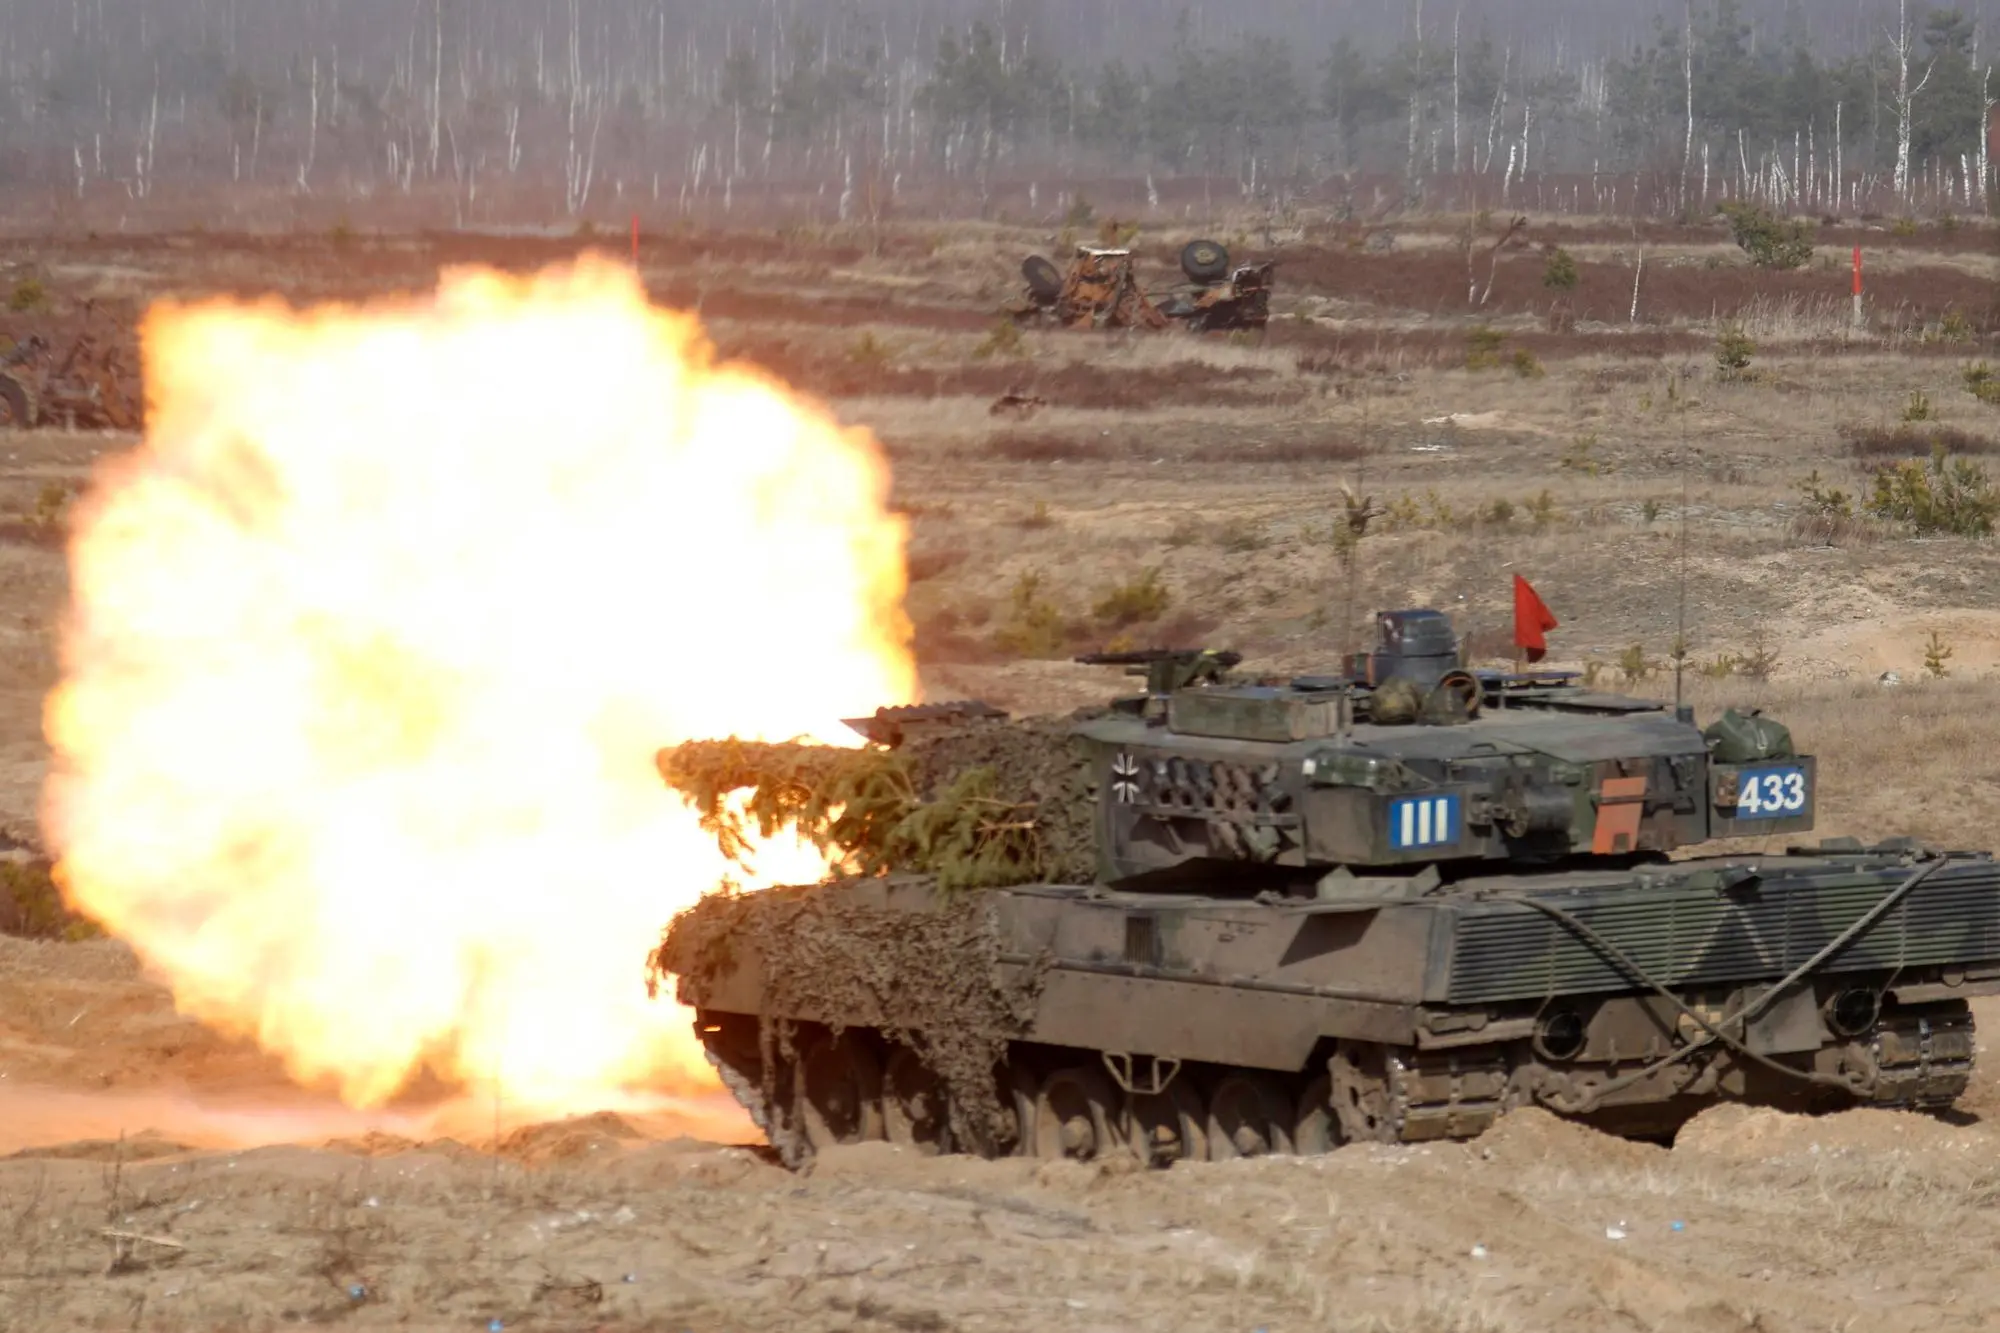 epa10427172 (FILE) - German soldiers of the NATO Extended Presence Battlegroup with their 'Leopard 2' battle tank participiate in the military exercise Crystal Arrow 2021 in Adazi Militari base, Latvia, 26 March 2021 (reissued 24 January 2023). German Chancellor Olaf Scholz has decided to send Leopard 2 tanks to Ukraine and allow other countries such as Poland to do so while the US may supply Abrams tanks, German media has reported 24 January 2023. EPA/VALDA KALNINA *** Local Caption *** 56789523